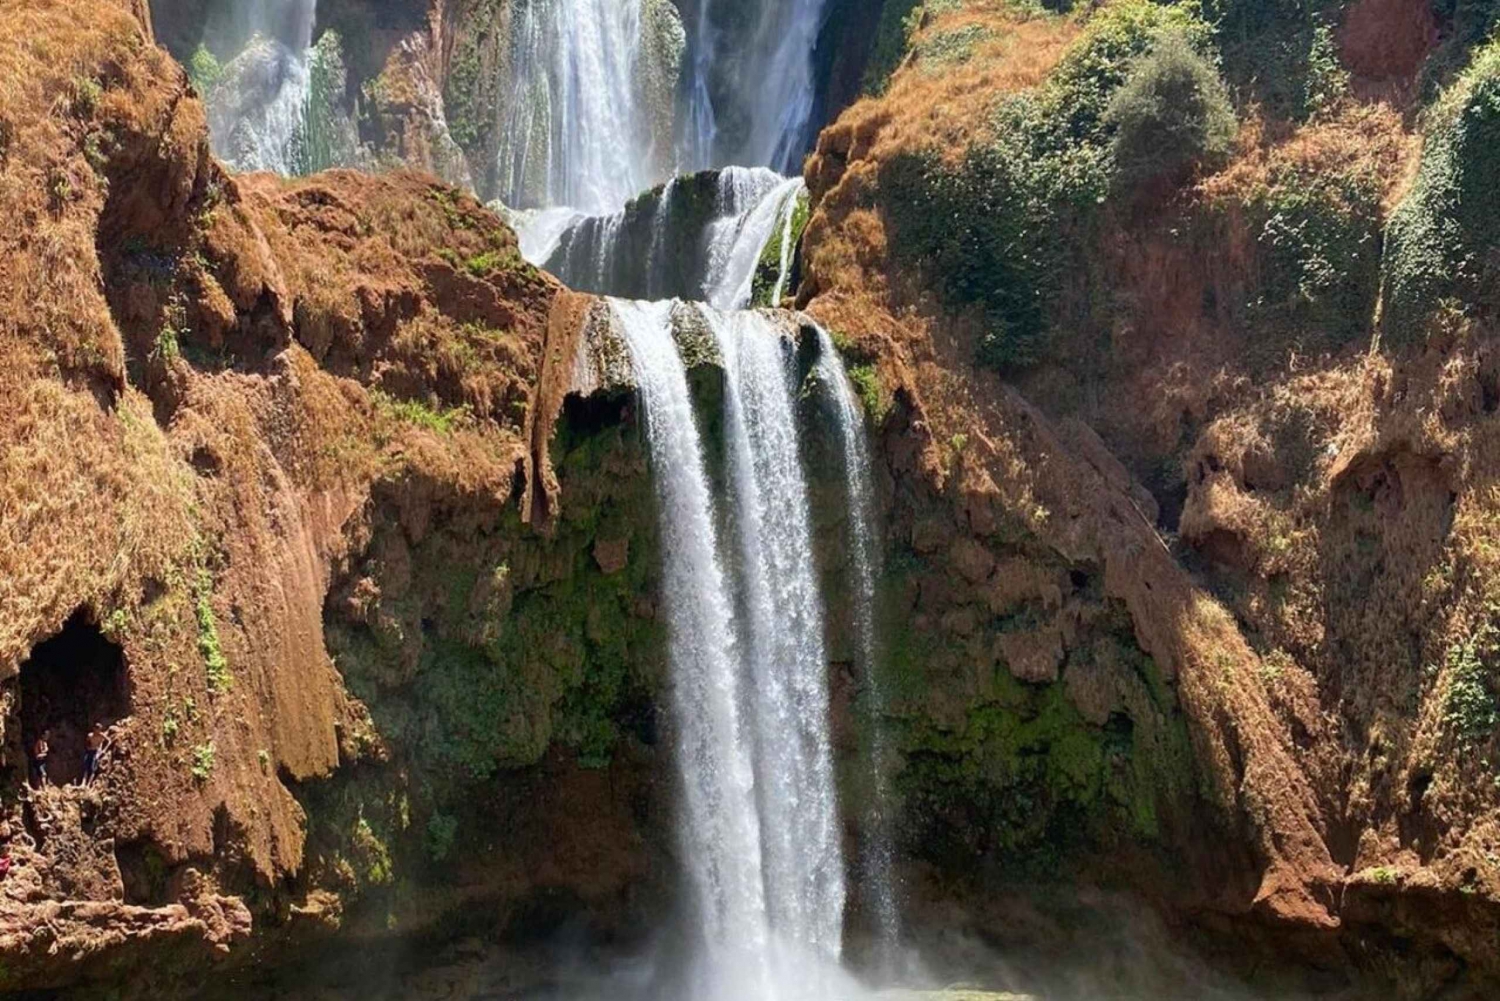 Full day Ouzoud Waterfalls excursion & Guide walk